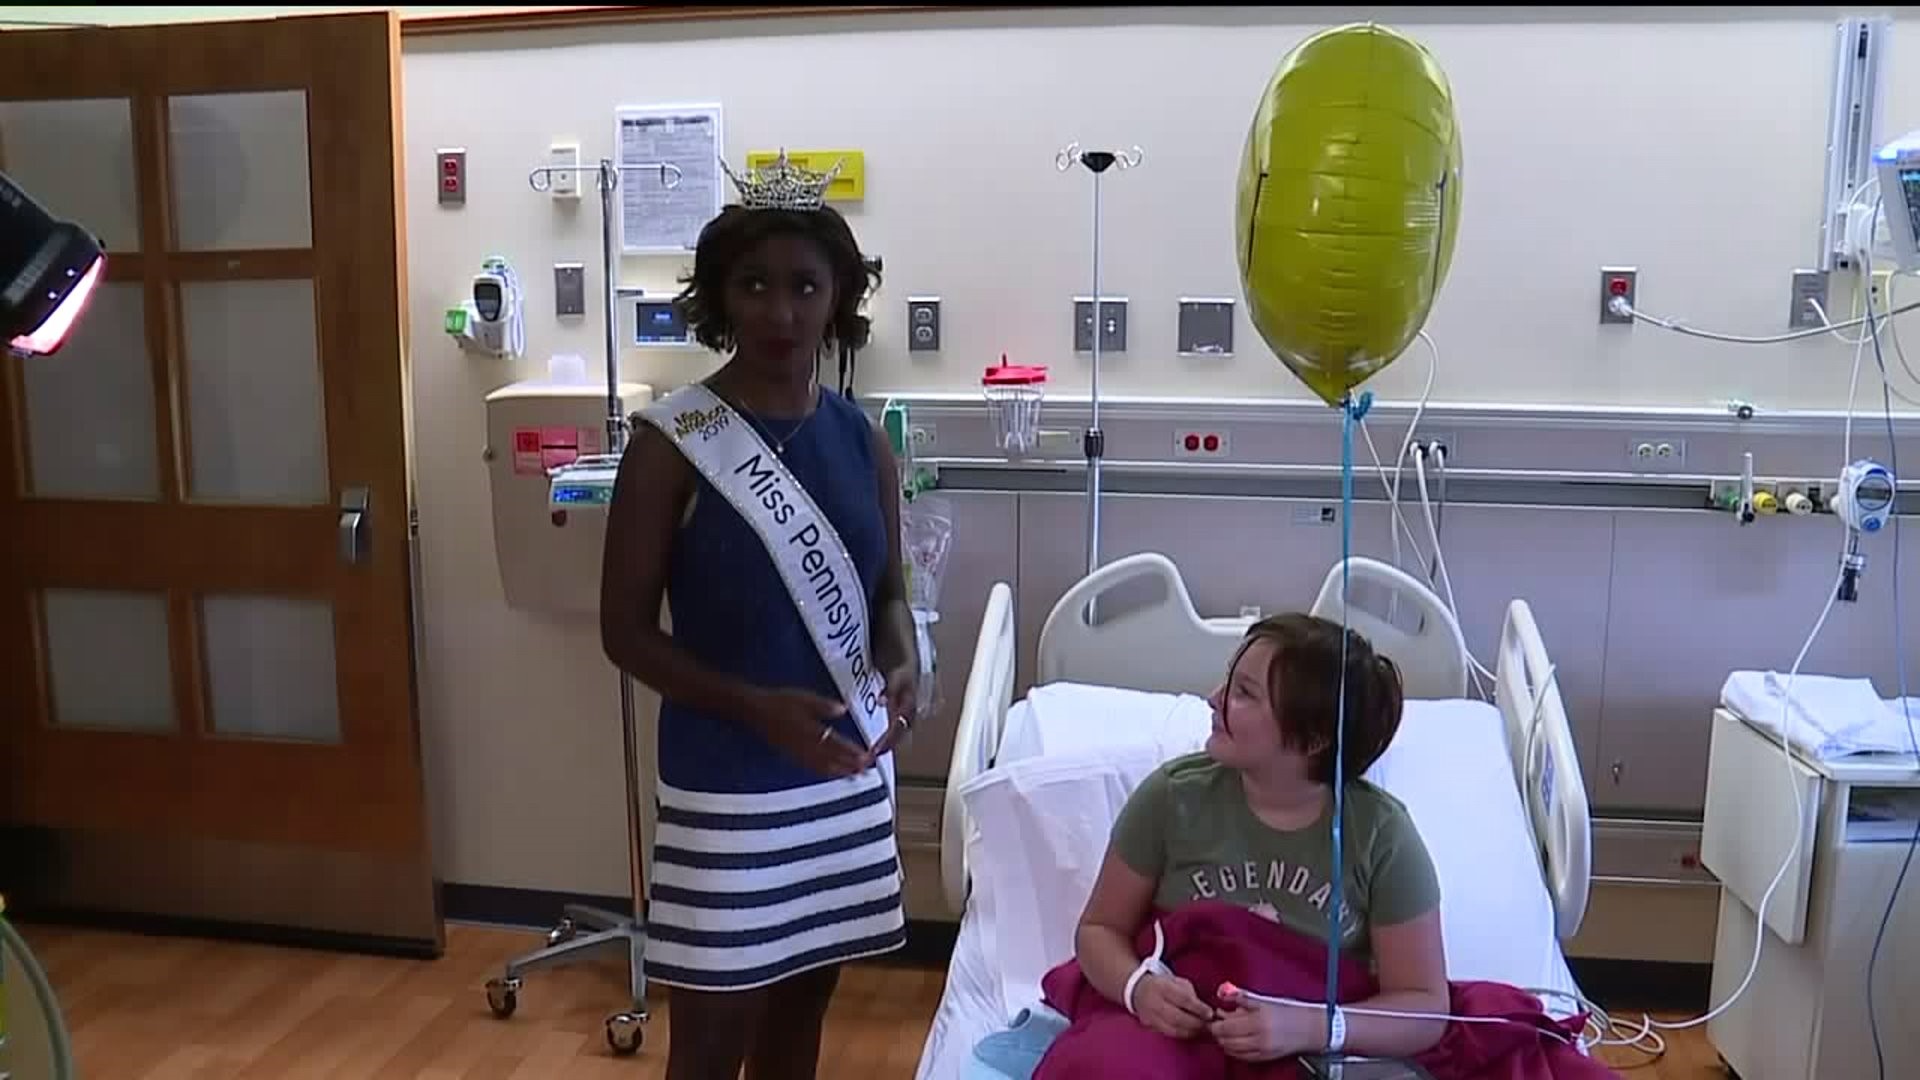 'I get to talk about miracles' - Miss Pennsylvania Visits Young Patients